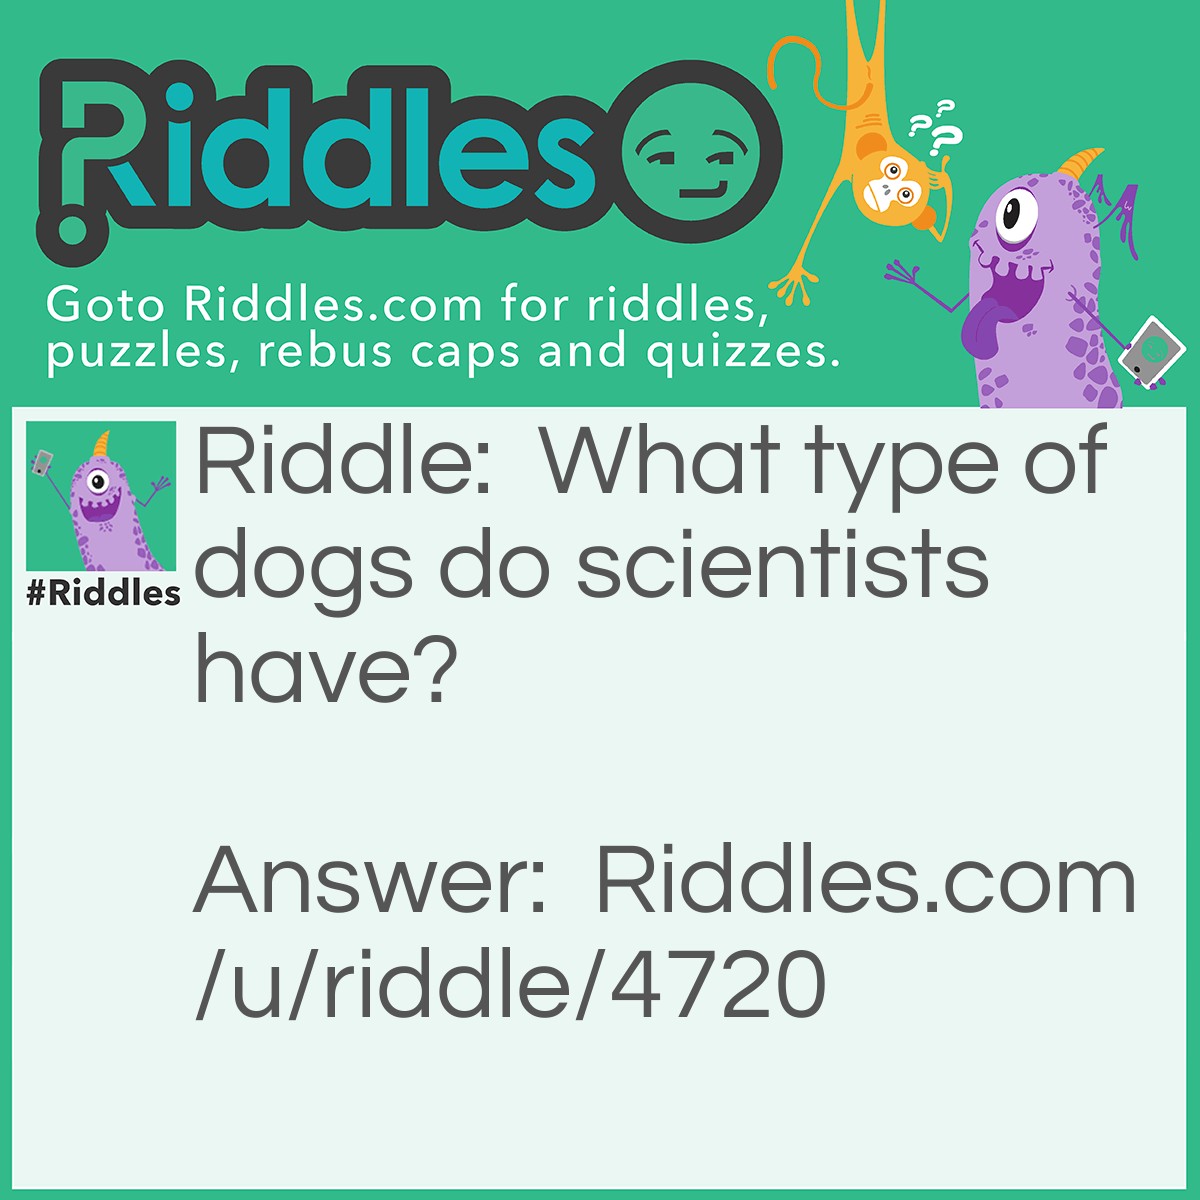 Riddle: What type of dogs do scientists have? Answer: Labradoodle.